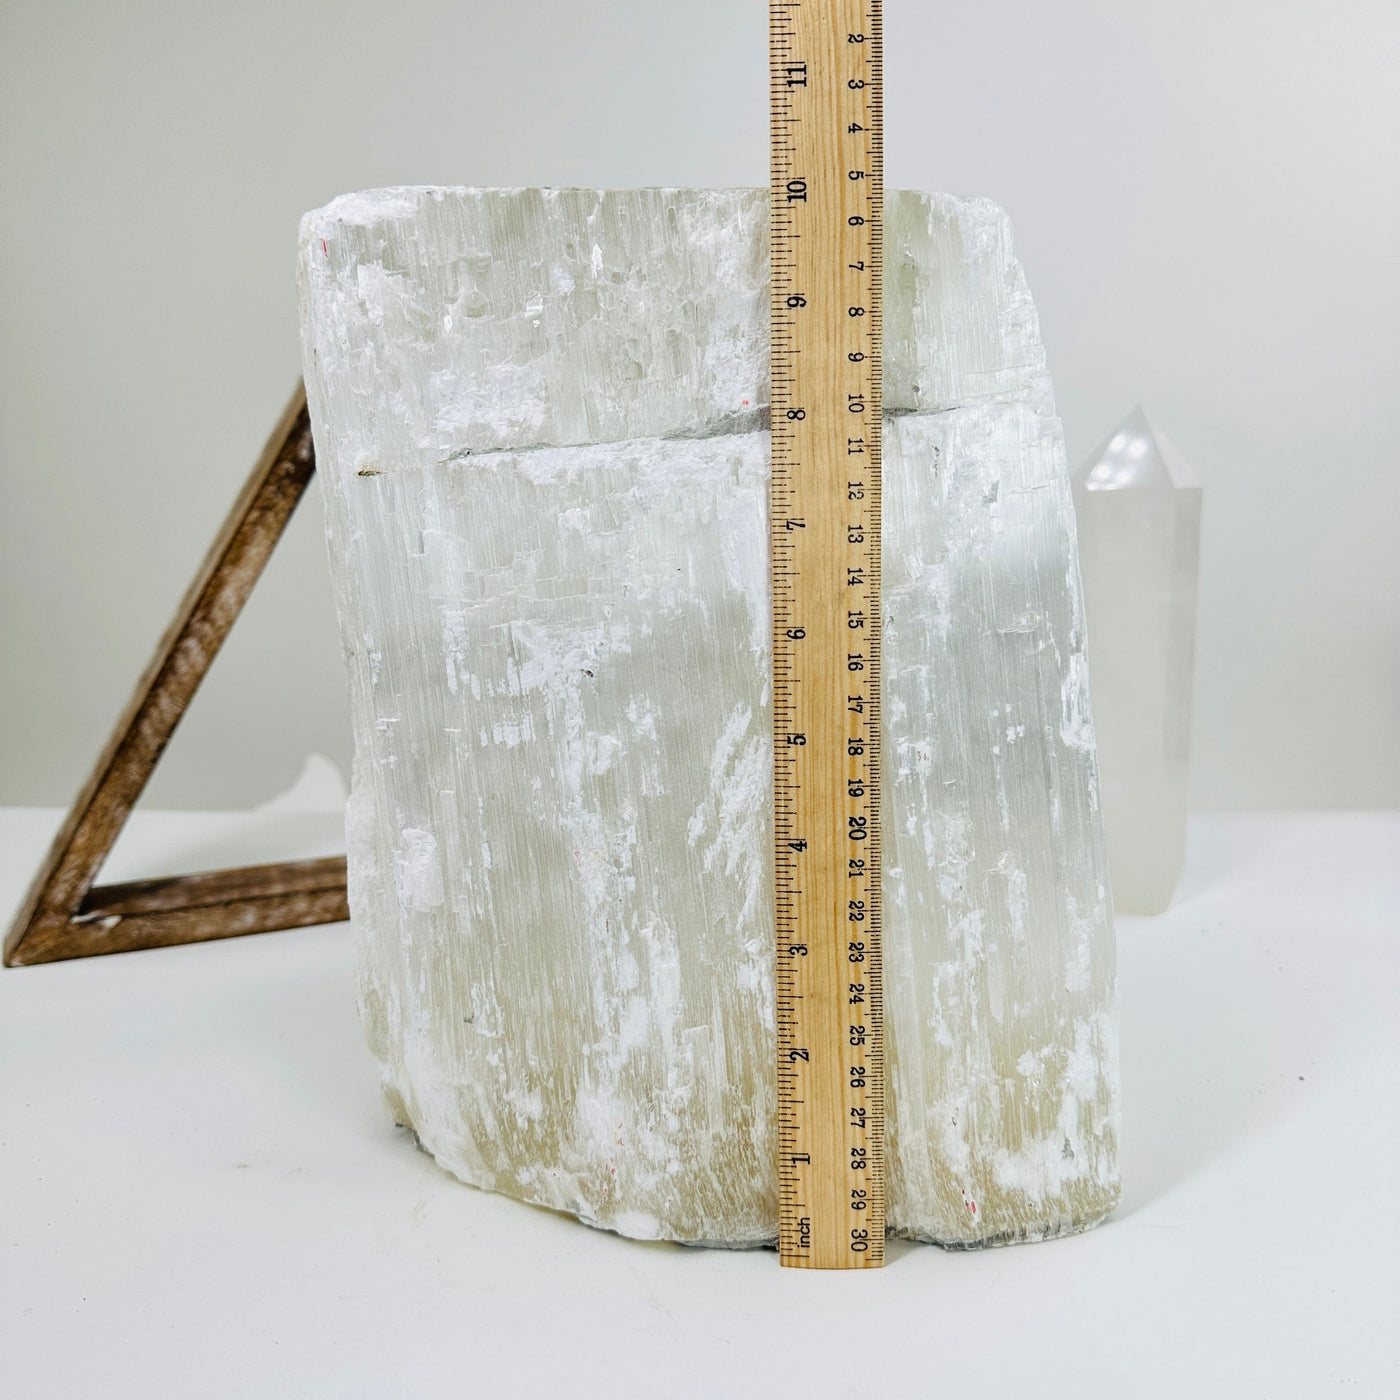 selenite cluster next to a ruler for size reference